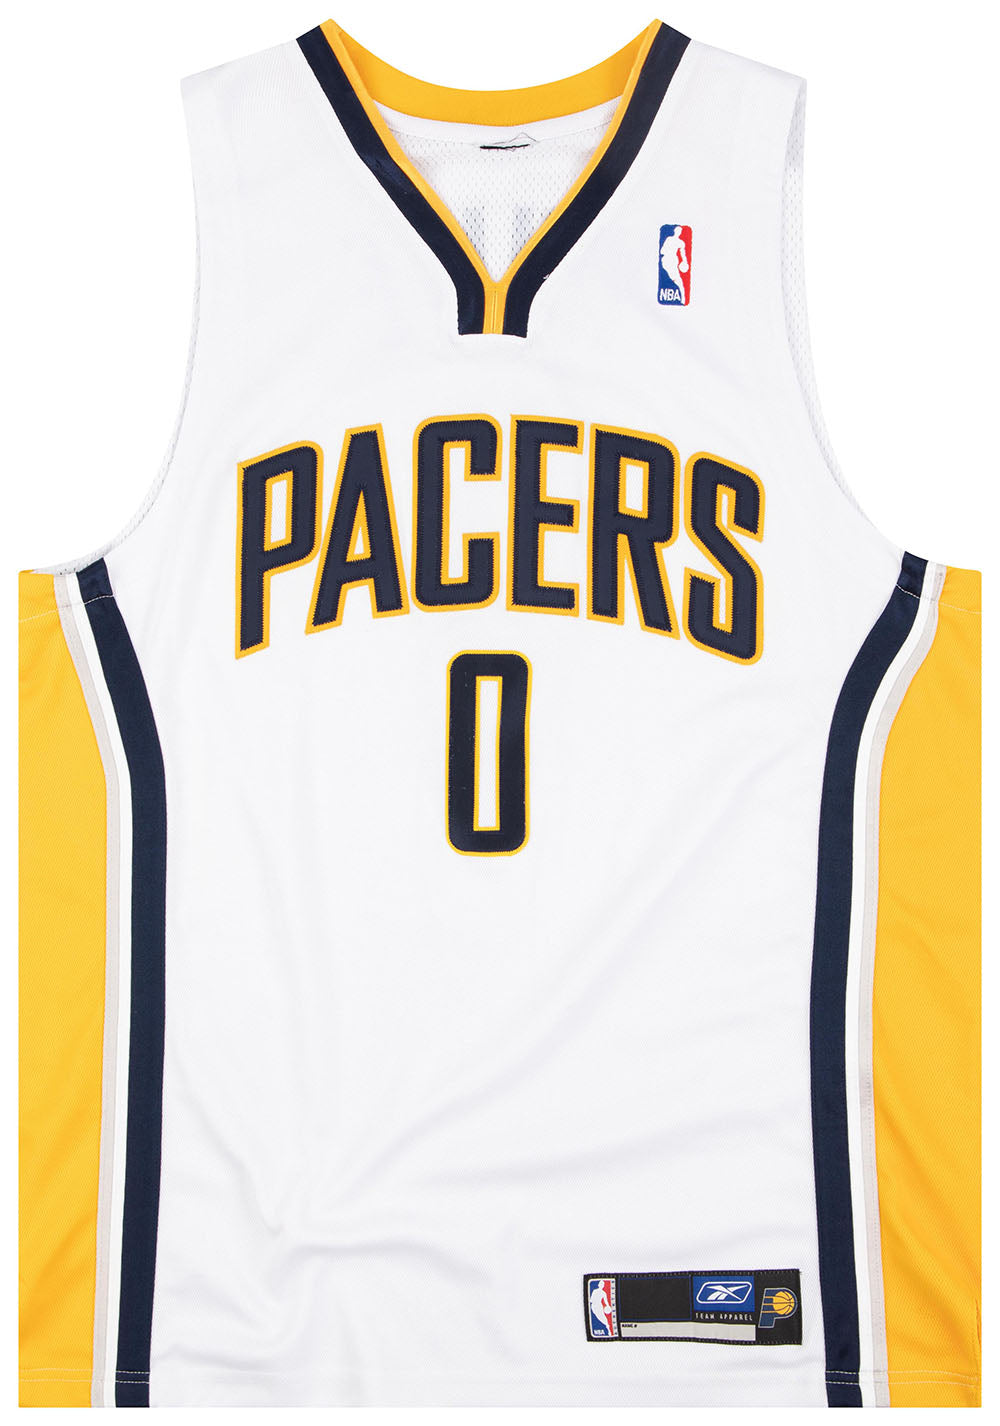 Adidas NBA Men's Indiana Pacers Blank Basketball Jersey, White